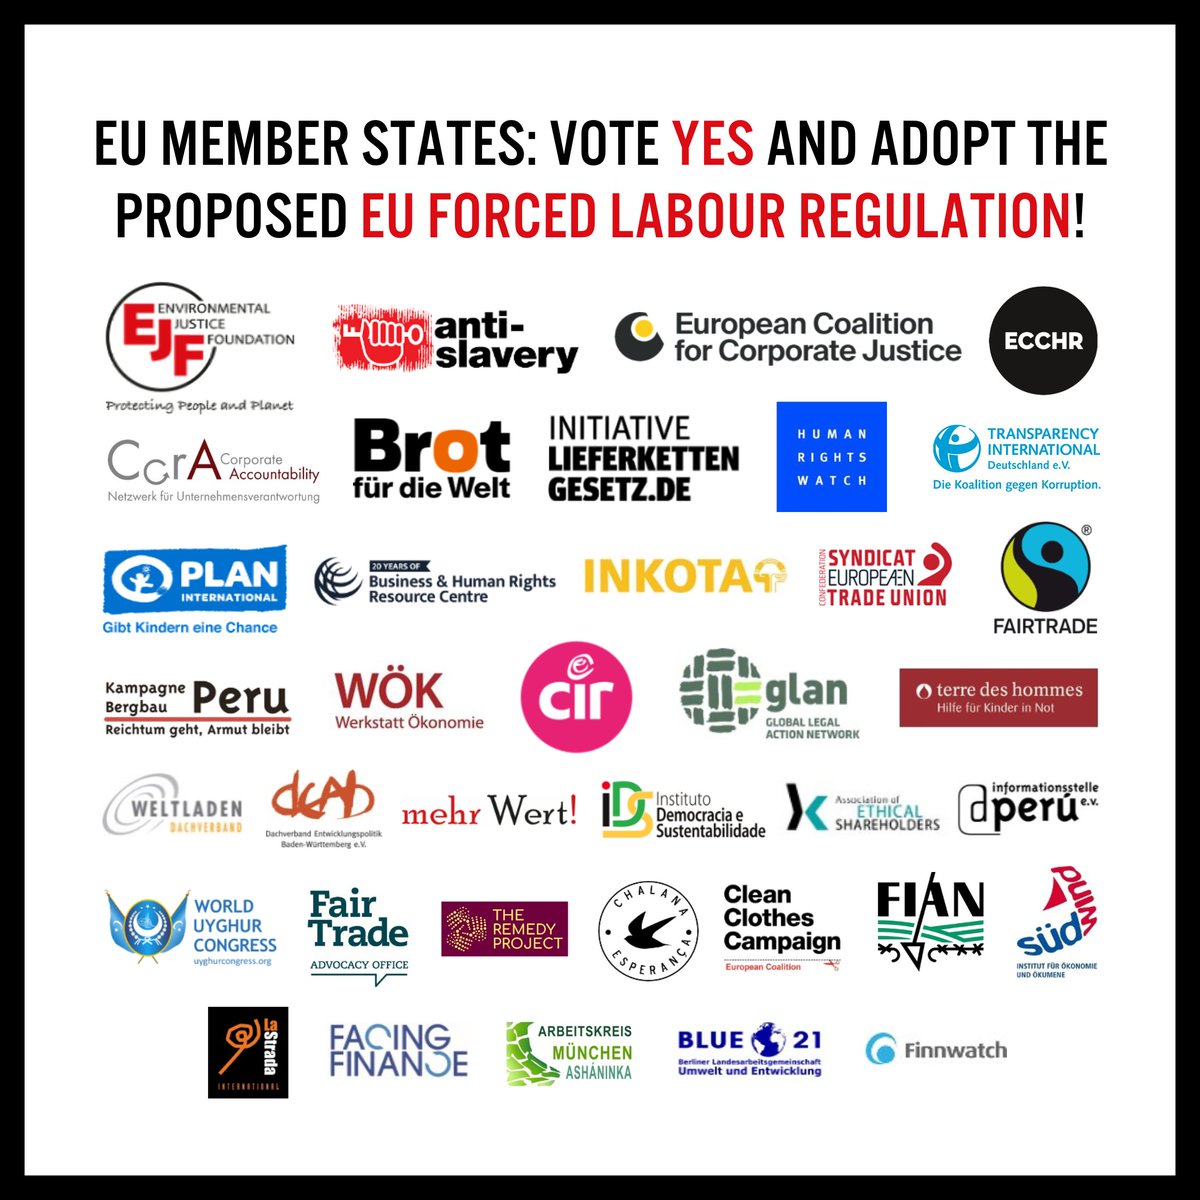 Important EU vote coming up tomorrow on the proposed forced labour regulation. @hrw joins @ejfoundation @Anti_Slavery @ECCHRBerlin & other orgs calling on EU govts to YES. ejfoundation.org/reports/joint-…